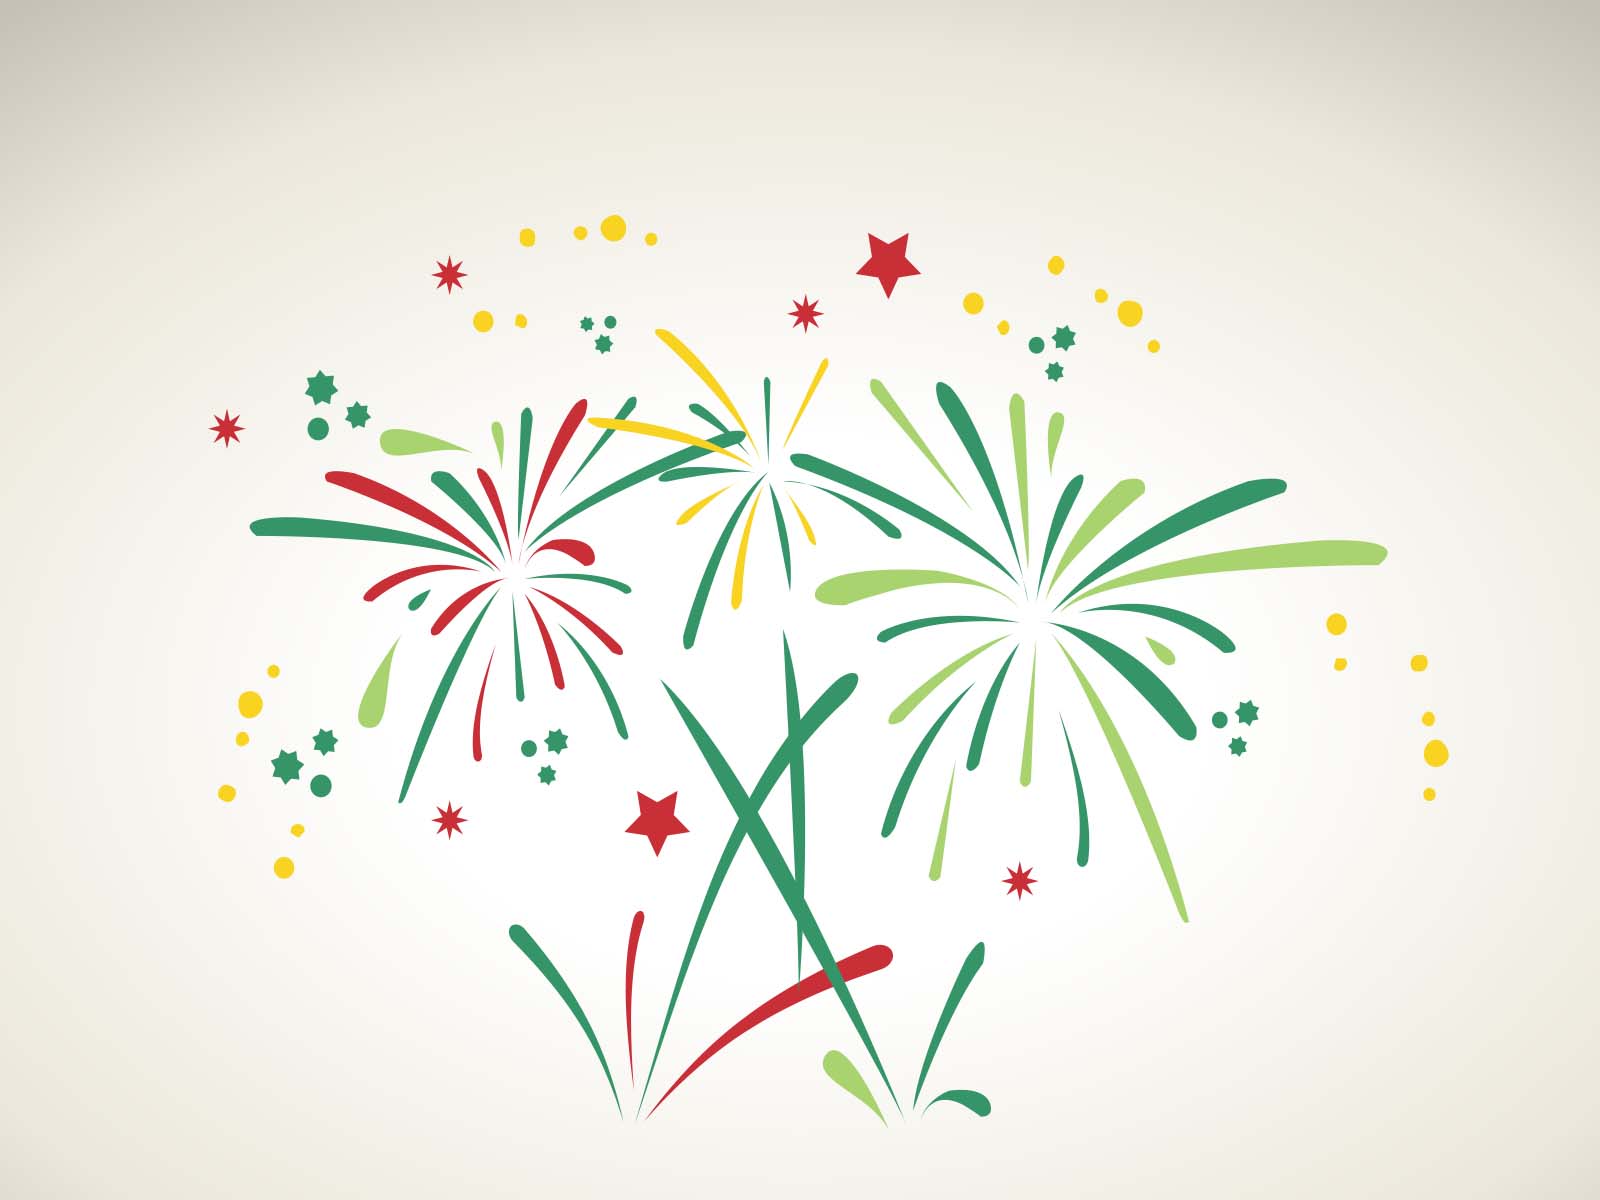 fireworks background for powerpoint